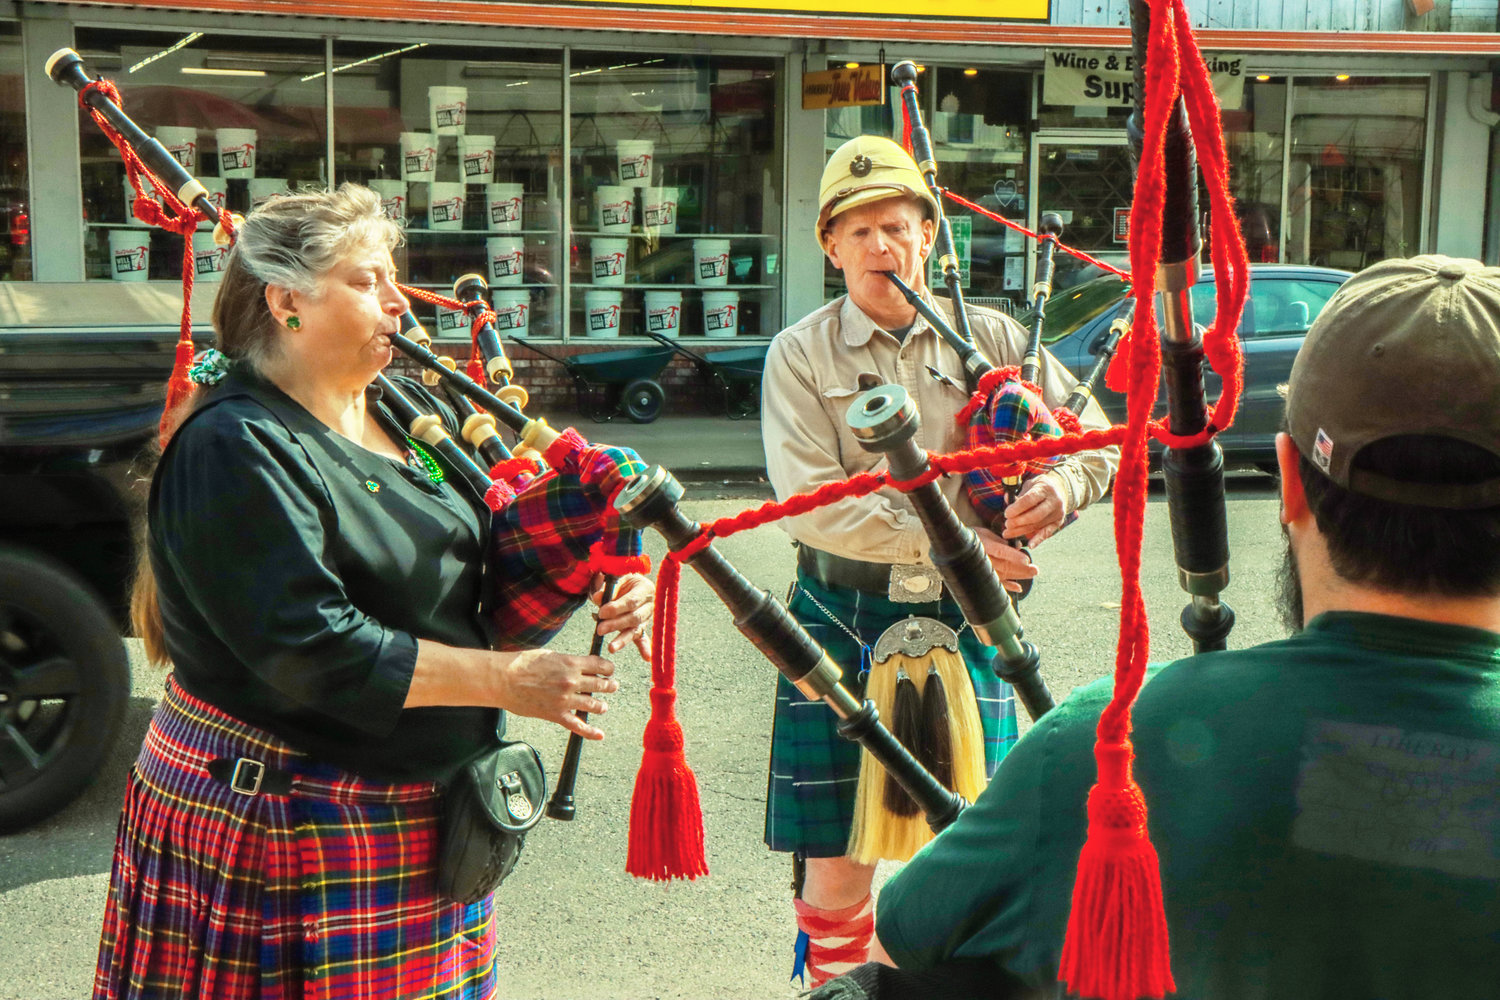 From left to right, Beverly York, Patrick Wright, and Aaron Amick play bagpipes outside of O'Blarney's Irish Pub on St. Patrick's Day in downtown Centralia.